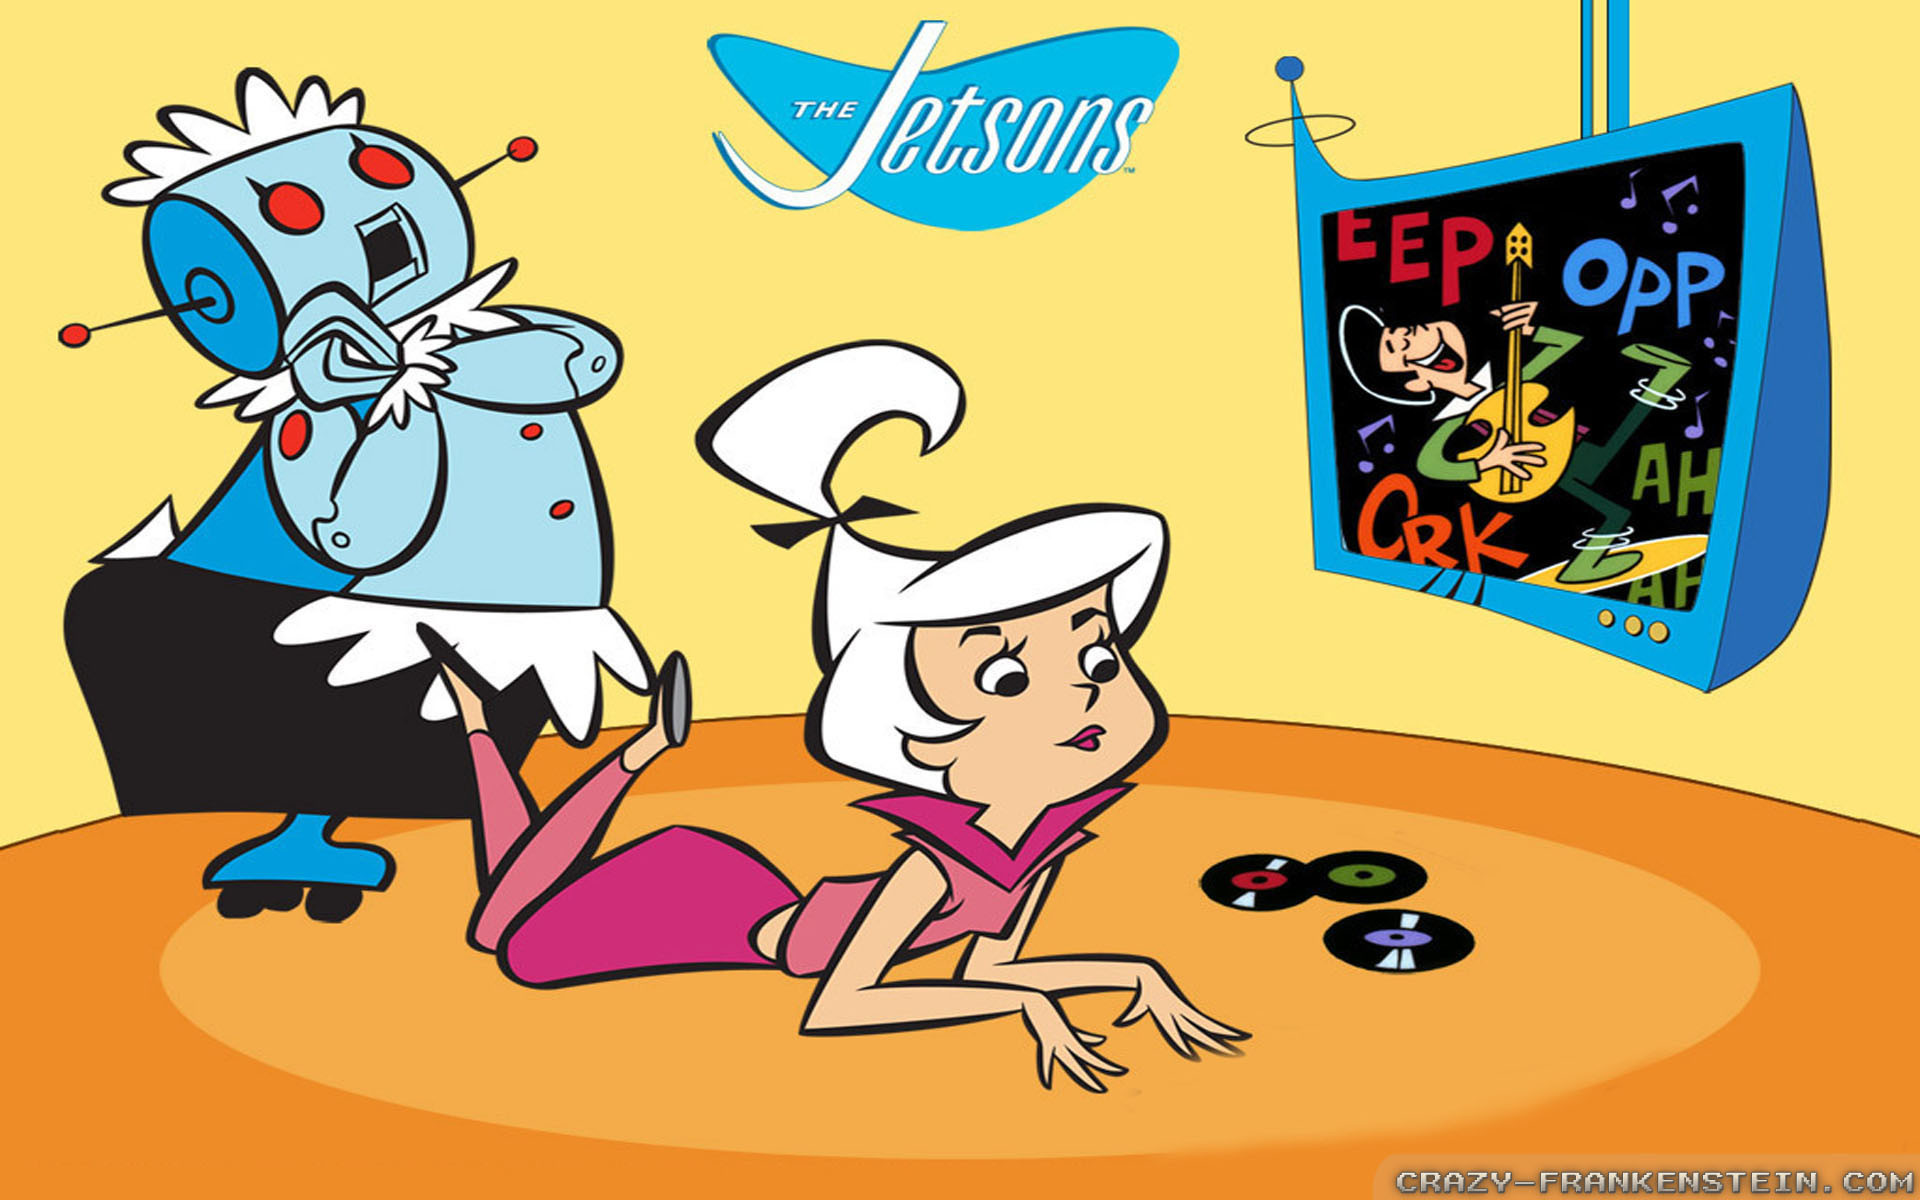 1920x1200 Wallpaper: Girl the Jetson wallpapers. Resolution: 1024x768 | 1280x1024 |  1600x1200. Widescreen Res: 1440x900 | 1680x1050 | 